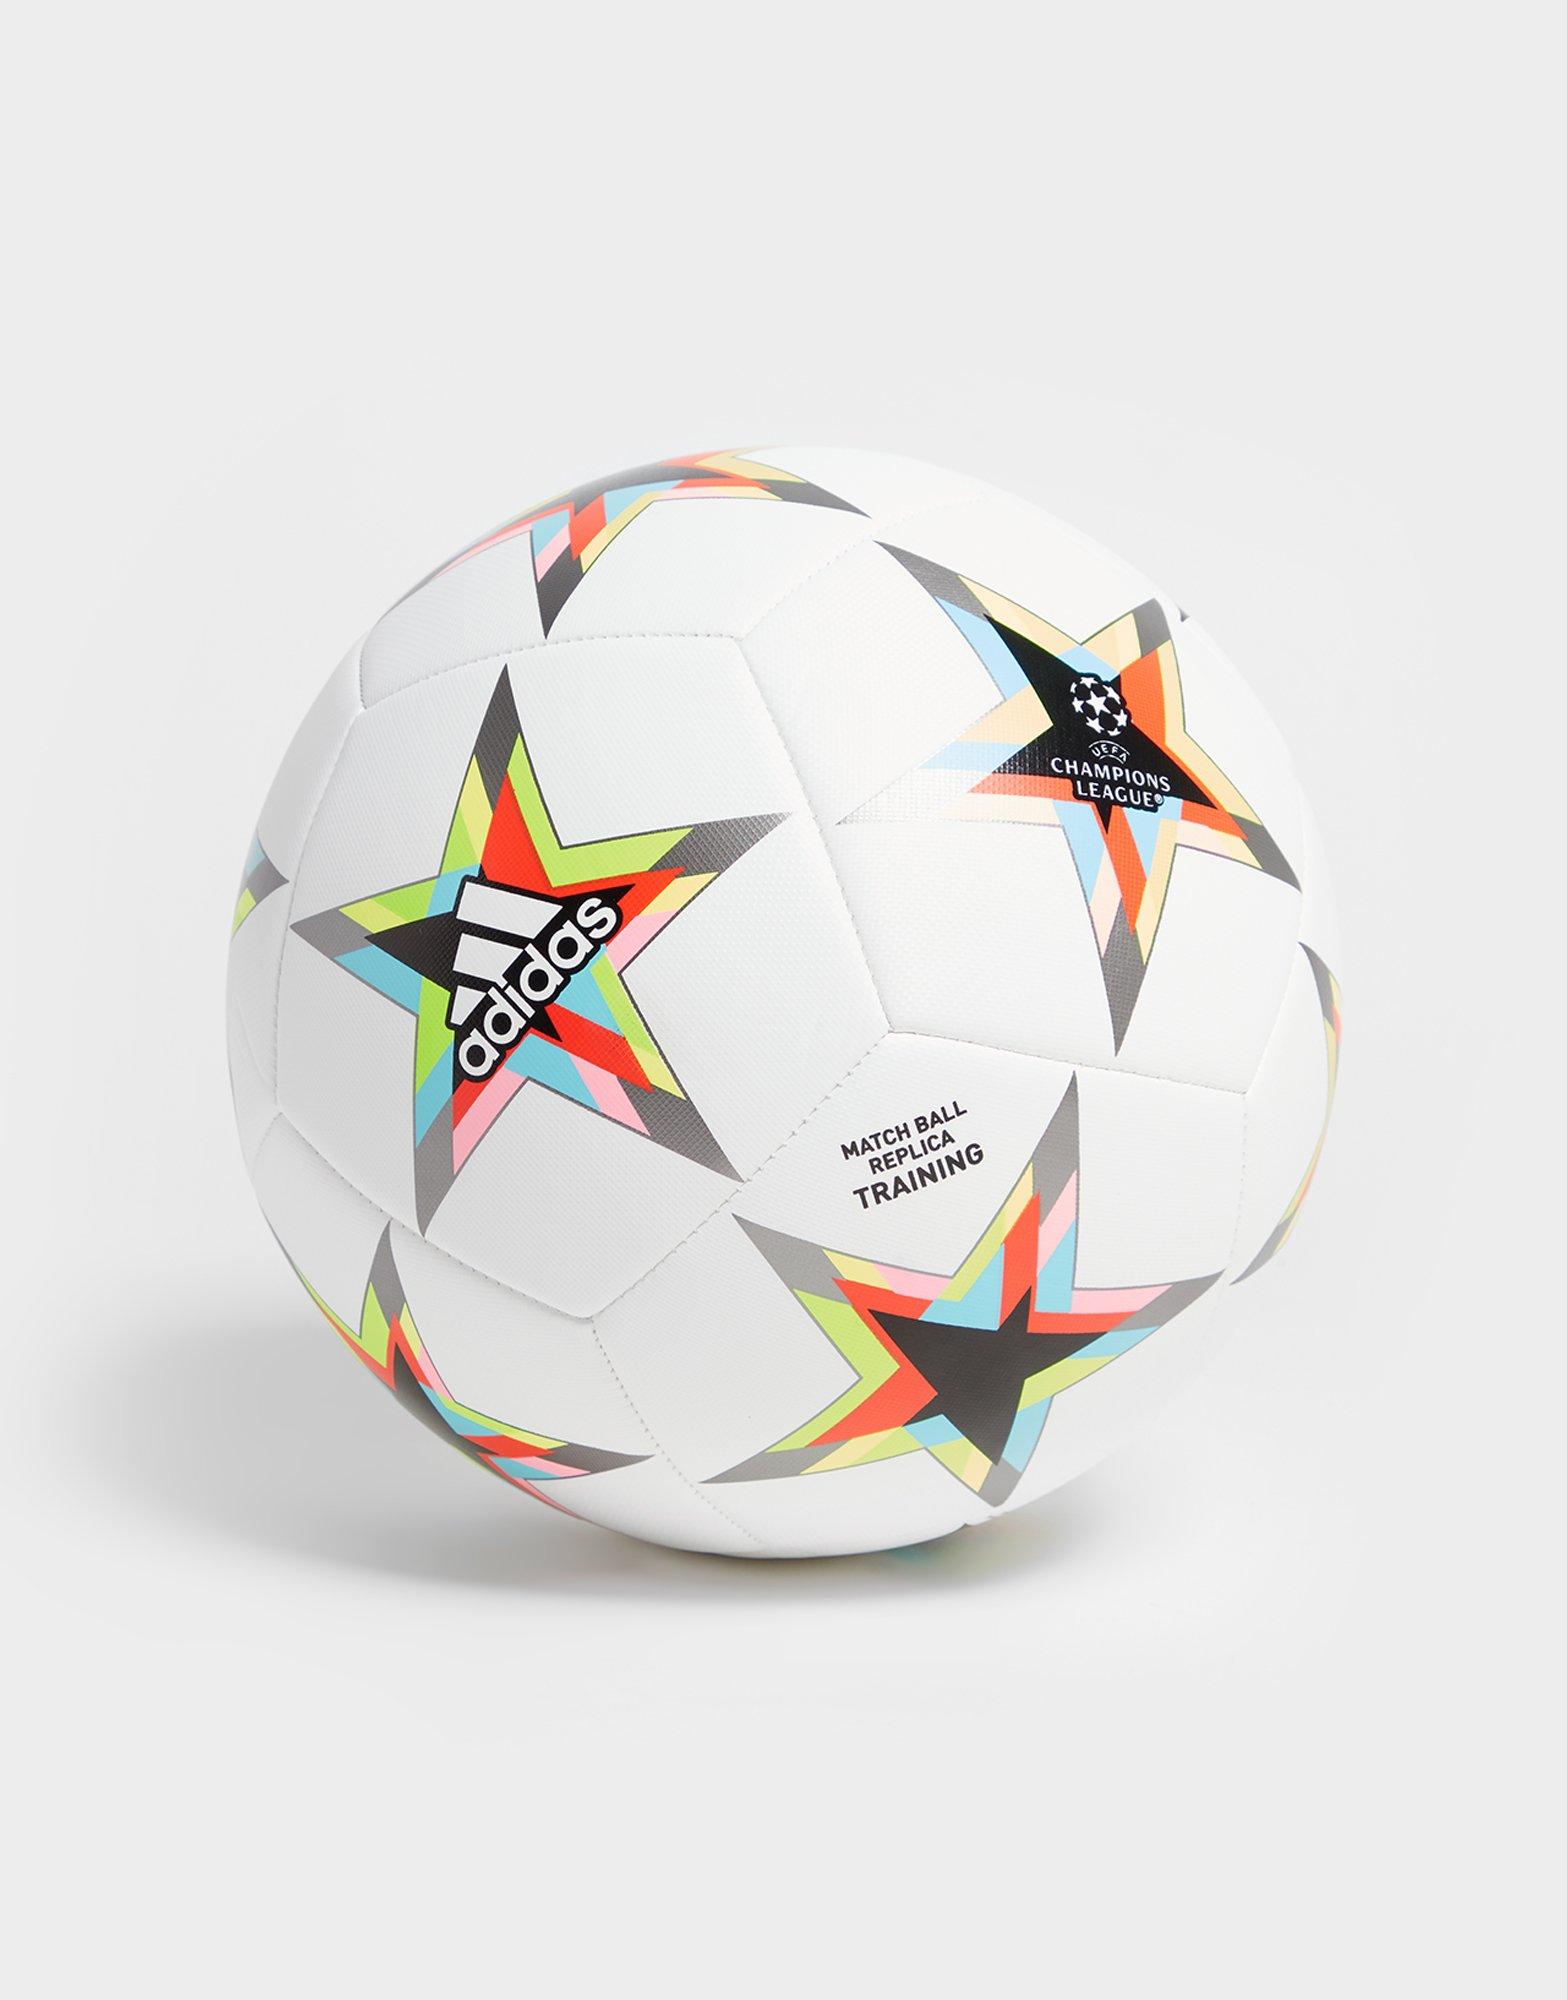 Adidas UEFA Champions League Pro Official Match Ball lupon.gov.ph